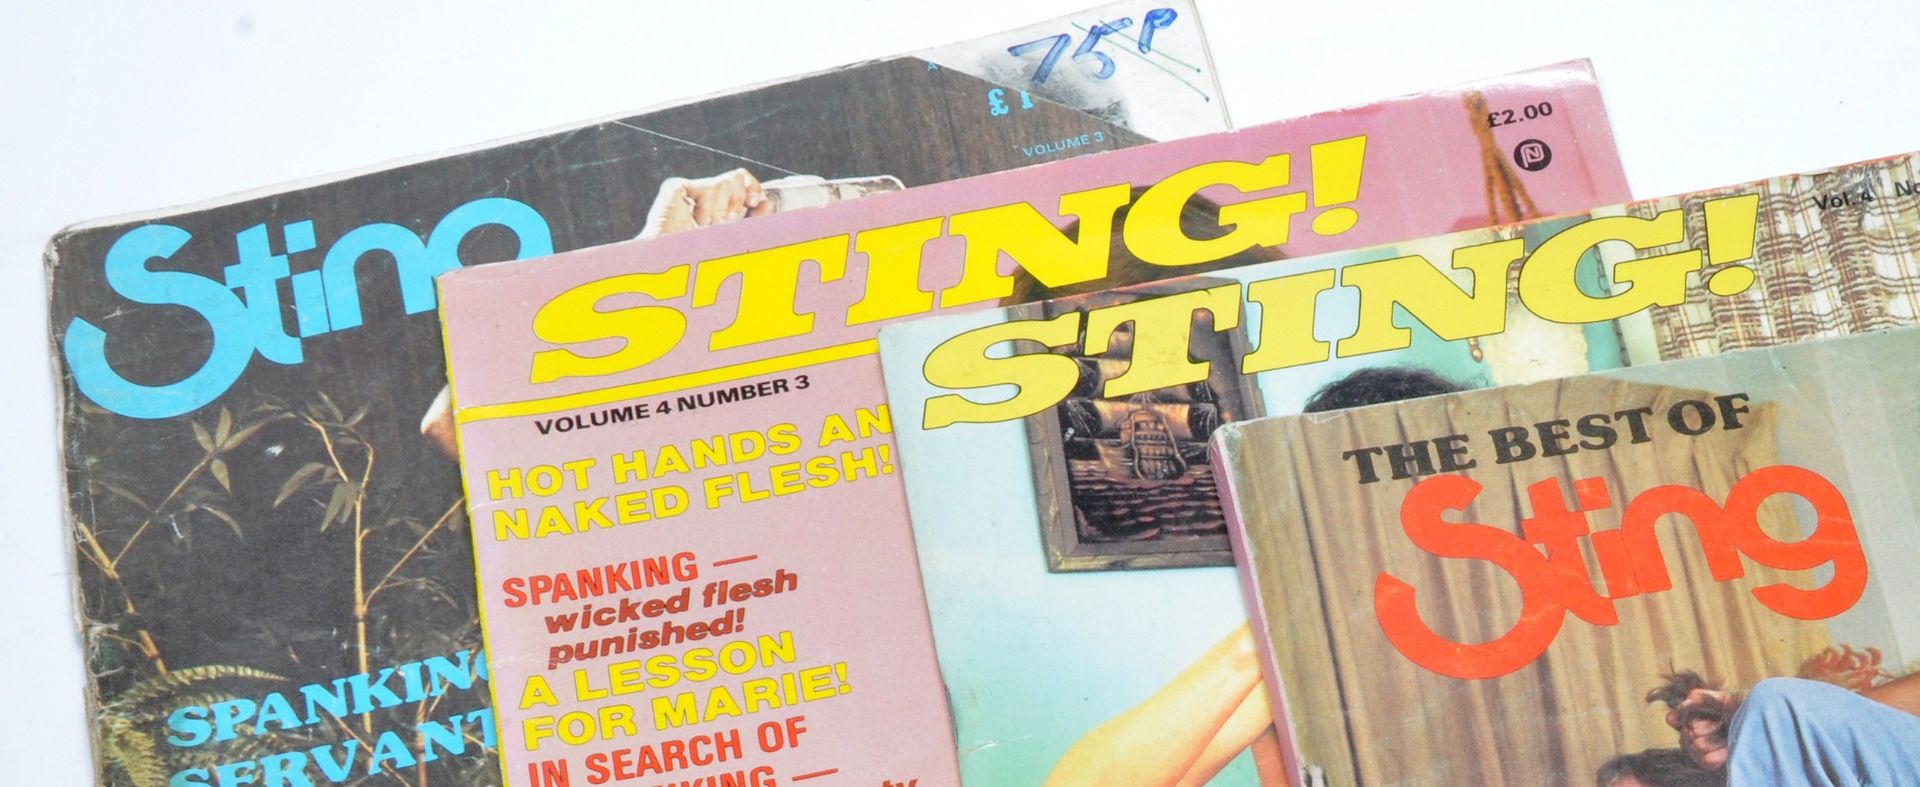 Adult Glamour Magazine / Vintage Erotica, comprising 4 issues of Sting. Please note unblurred